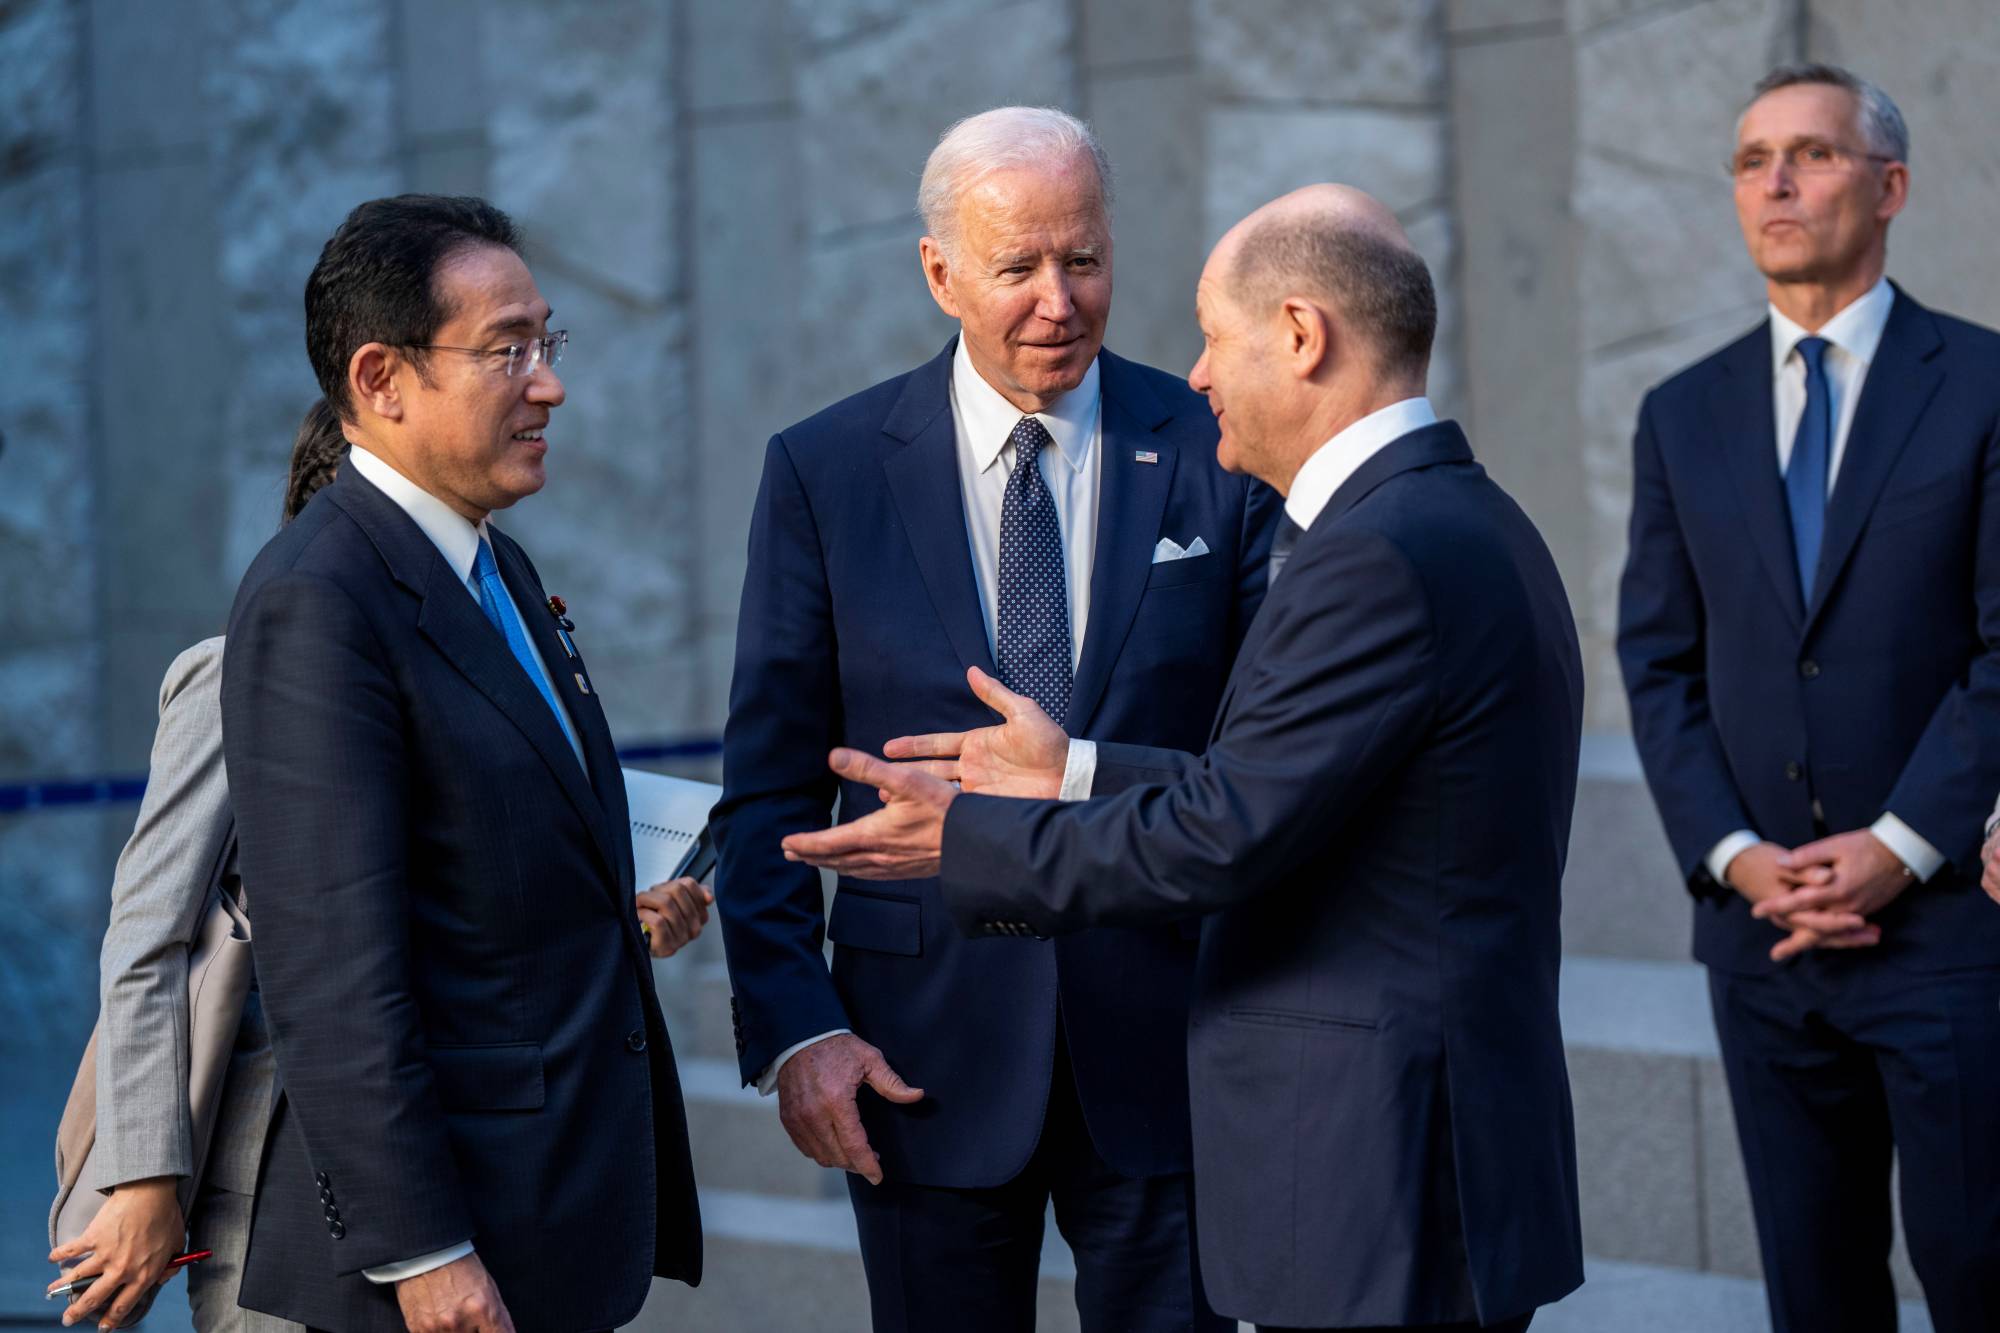 Prime Minister Fumio Kishida meets with U.S. President Joe Biden and German Chancellor Olaf Scholz at NATO Headquarters in Brussels in March 2022.  | POOL / VIA REUTERS